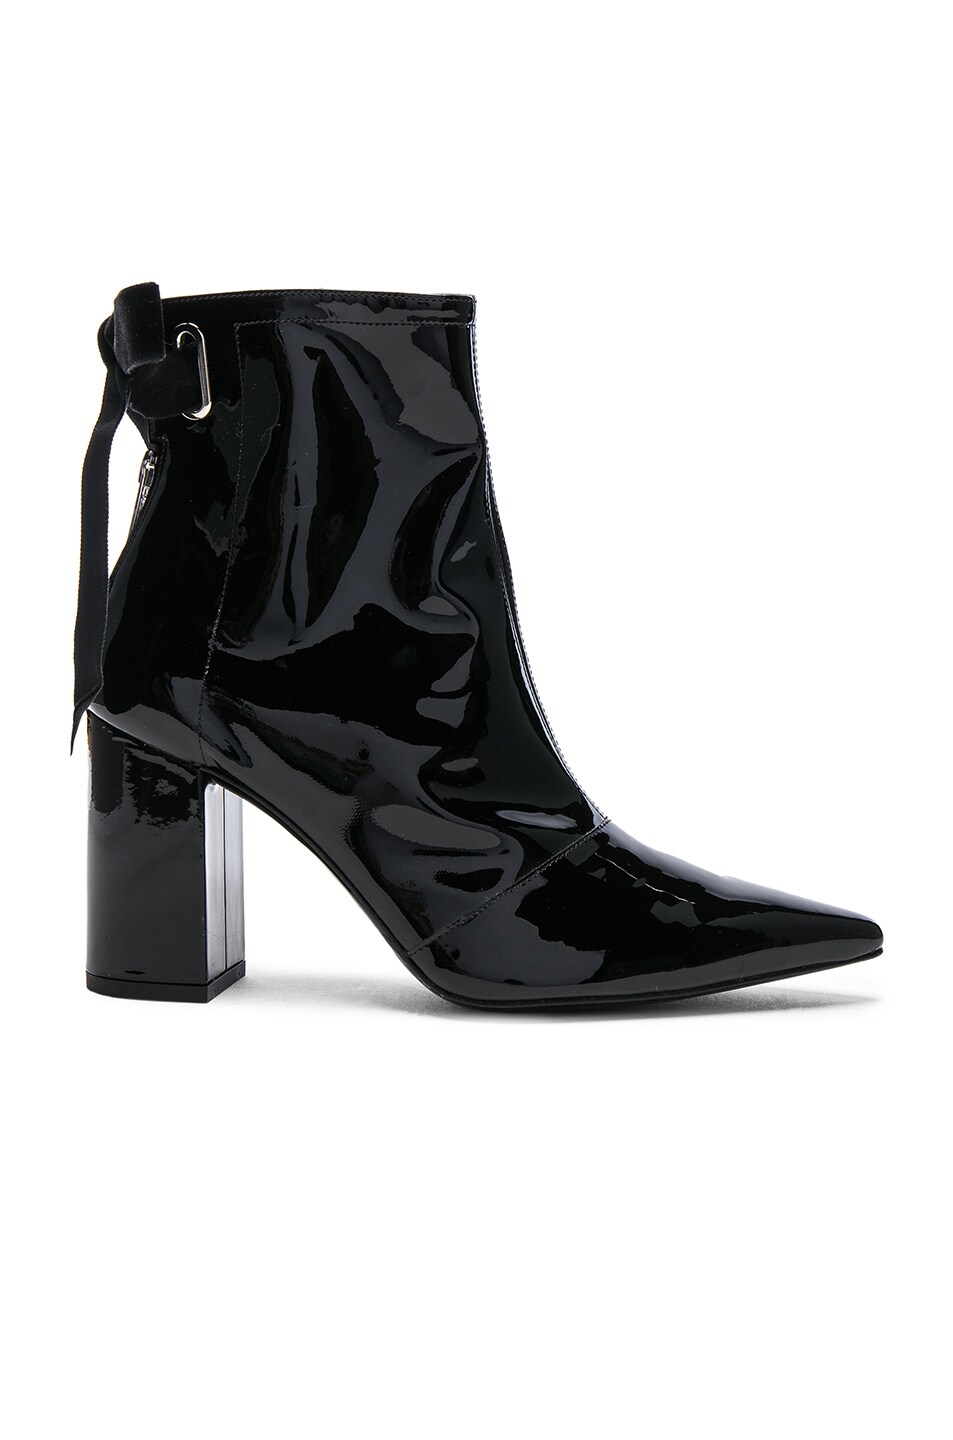 Image 1 of self-portrait x Robert Clergerie Patent Leather Karli Boots in Black Patent